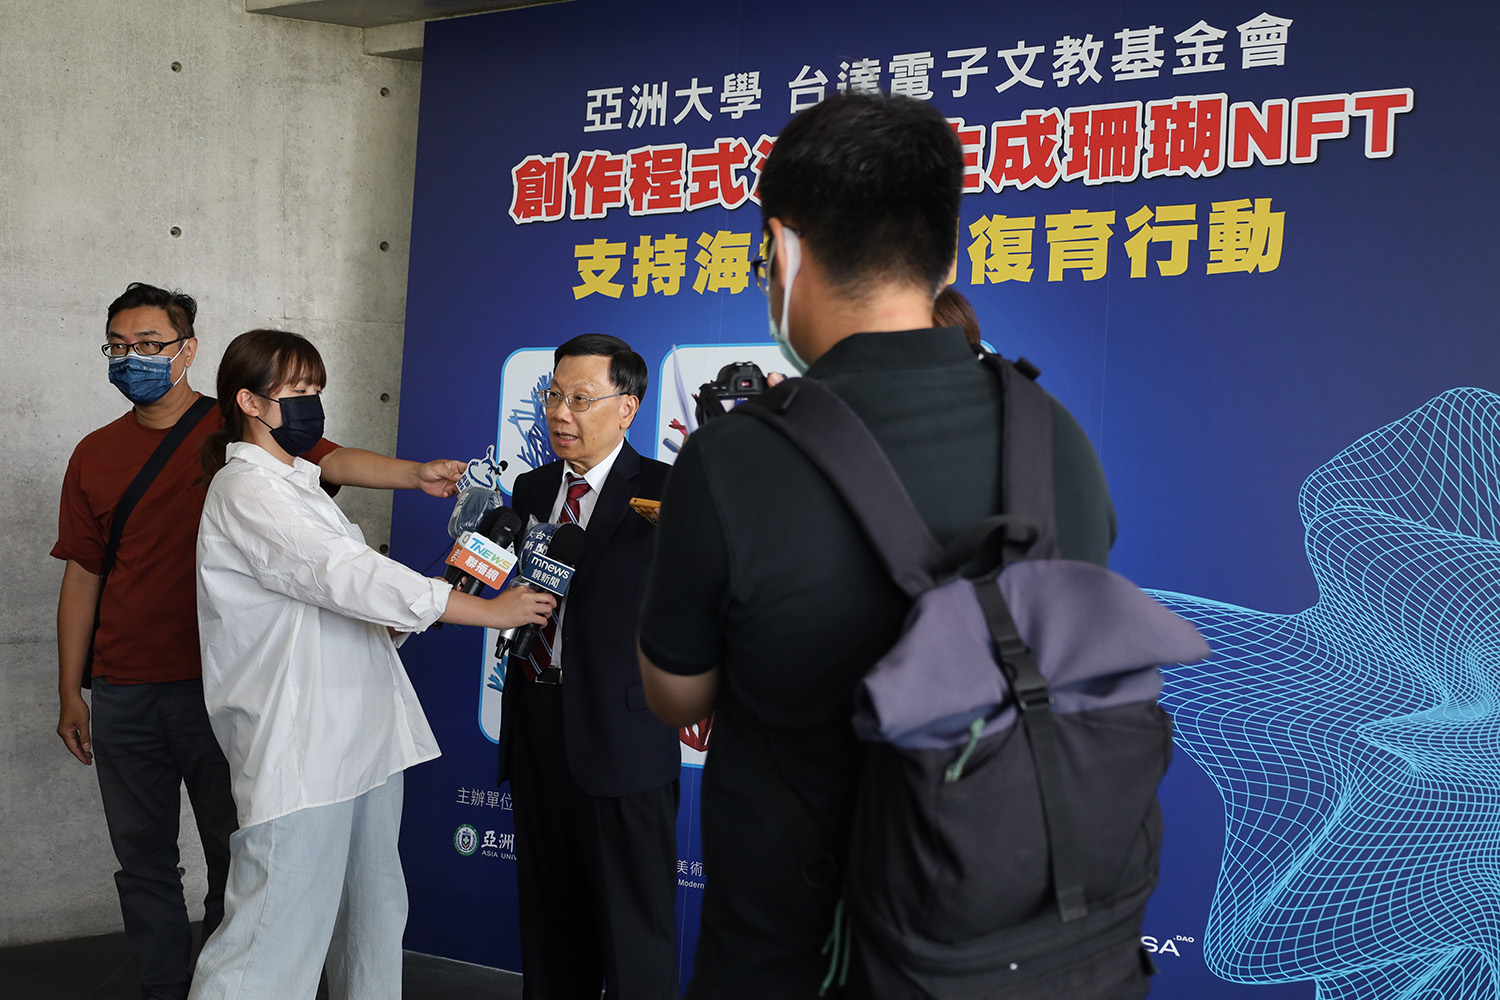 Professor Jeffrey J.P. Tsai, President of Asia University, is interviewed by the media, talking about the environmental protection initiative of coral art NFT.